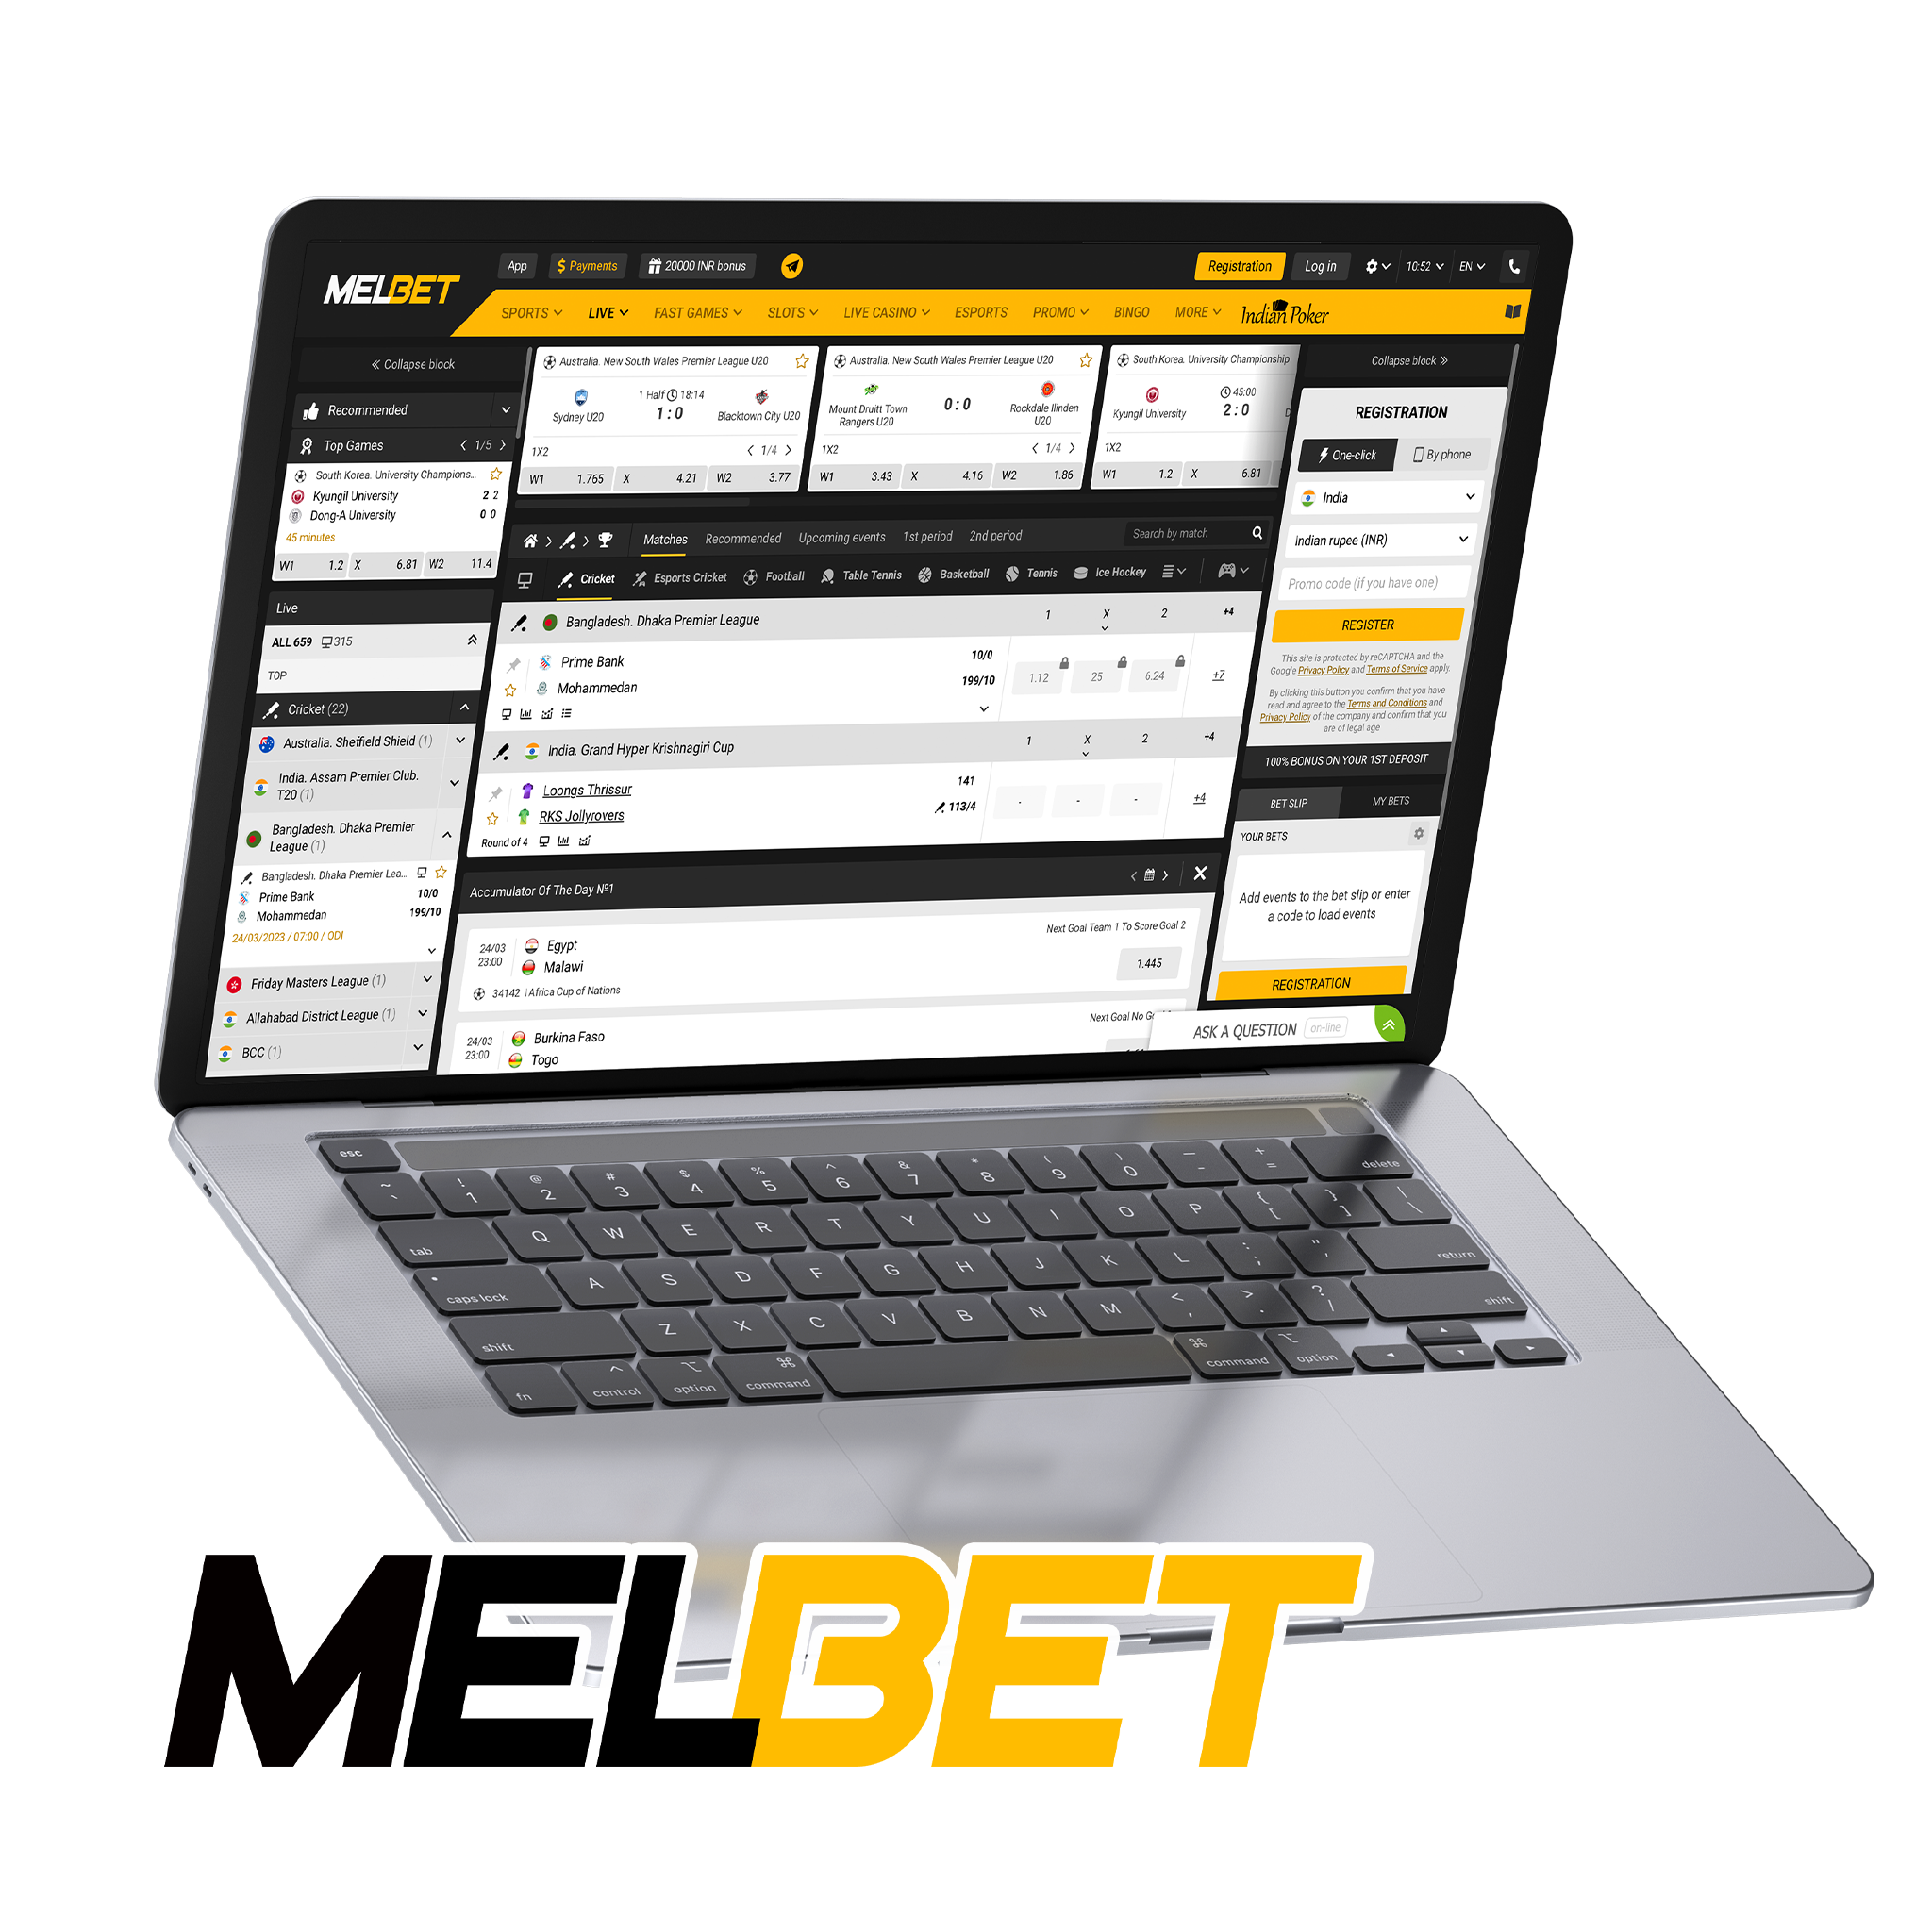 On the Melbet website, you find all the most important cricket events.